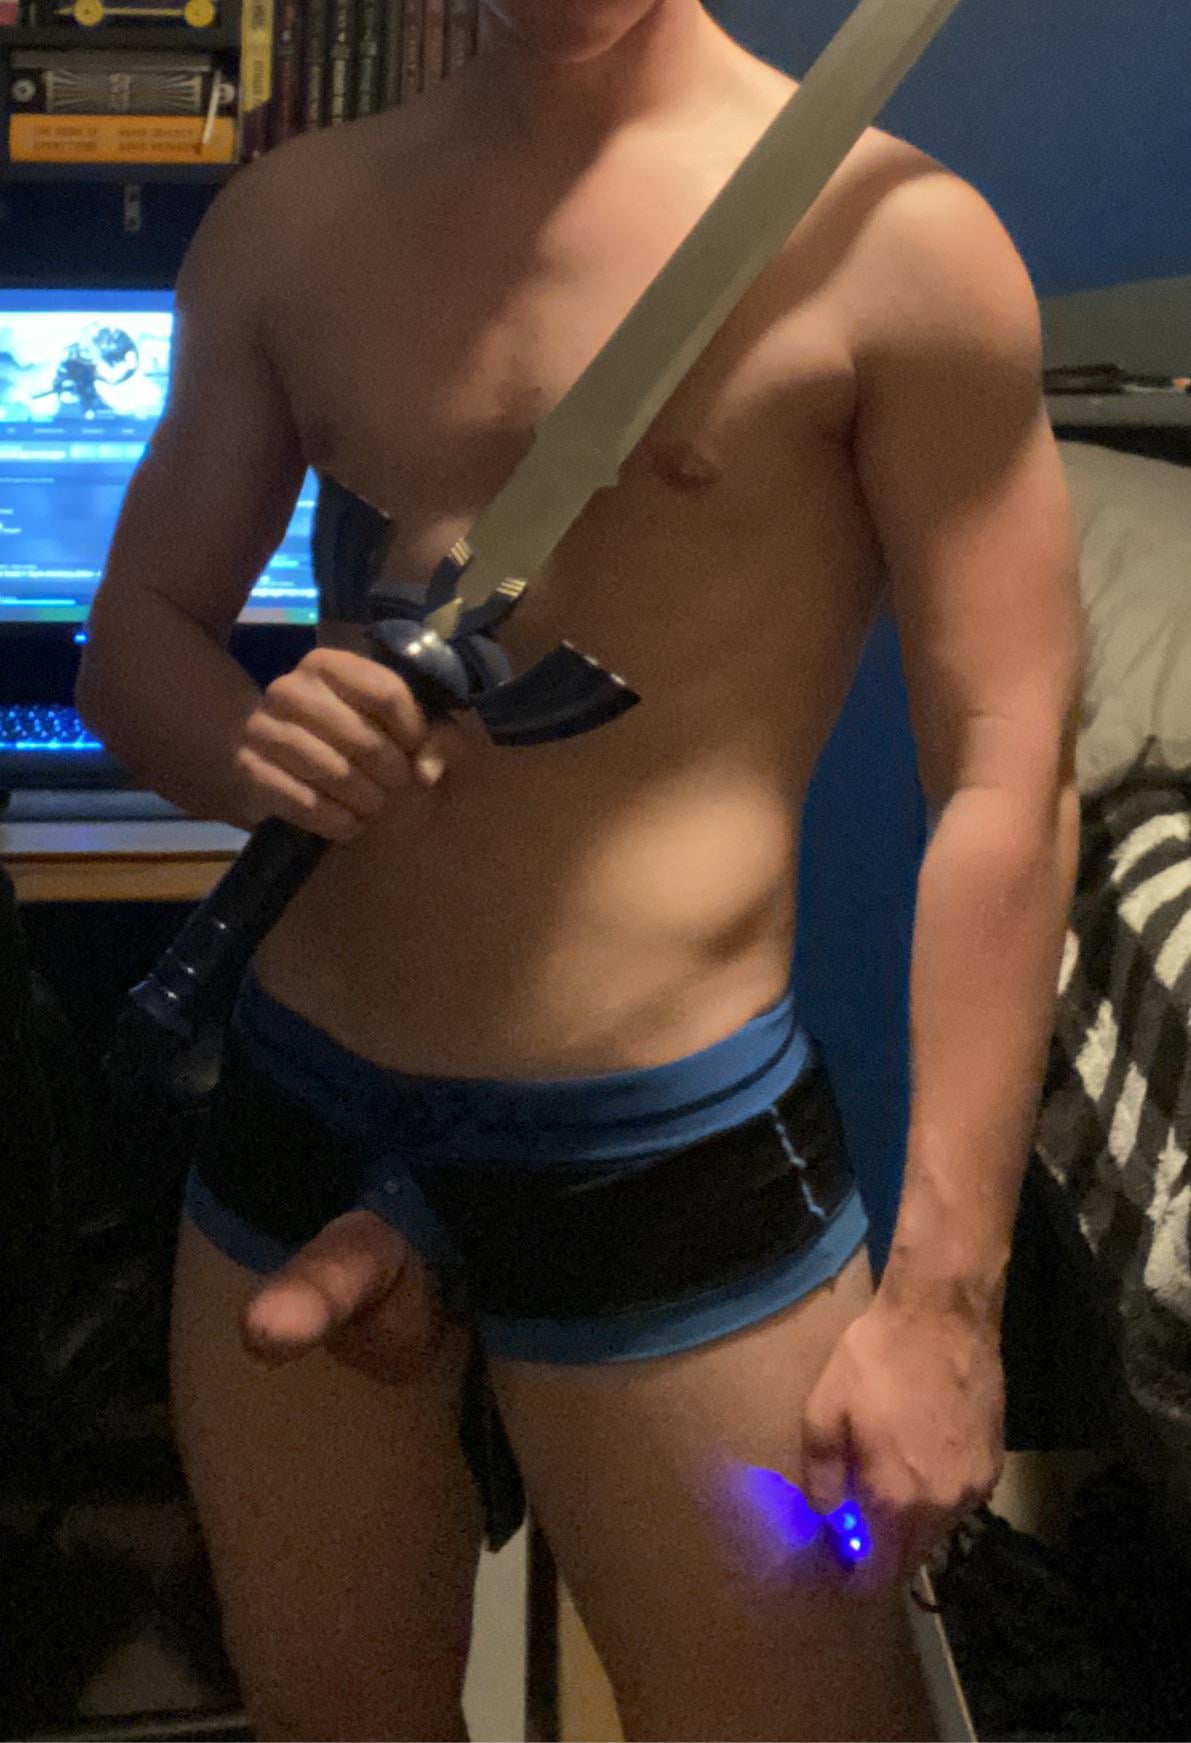 Would you let this 18M fuck you